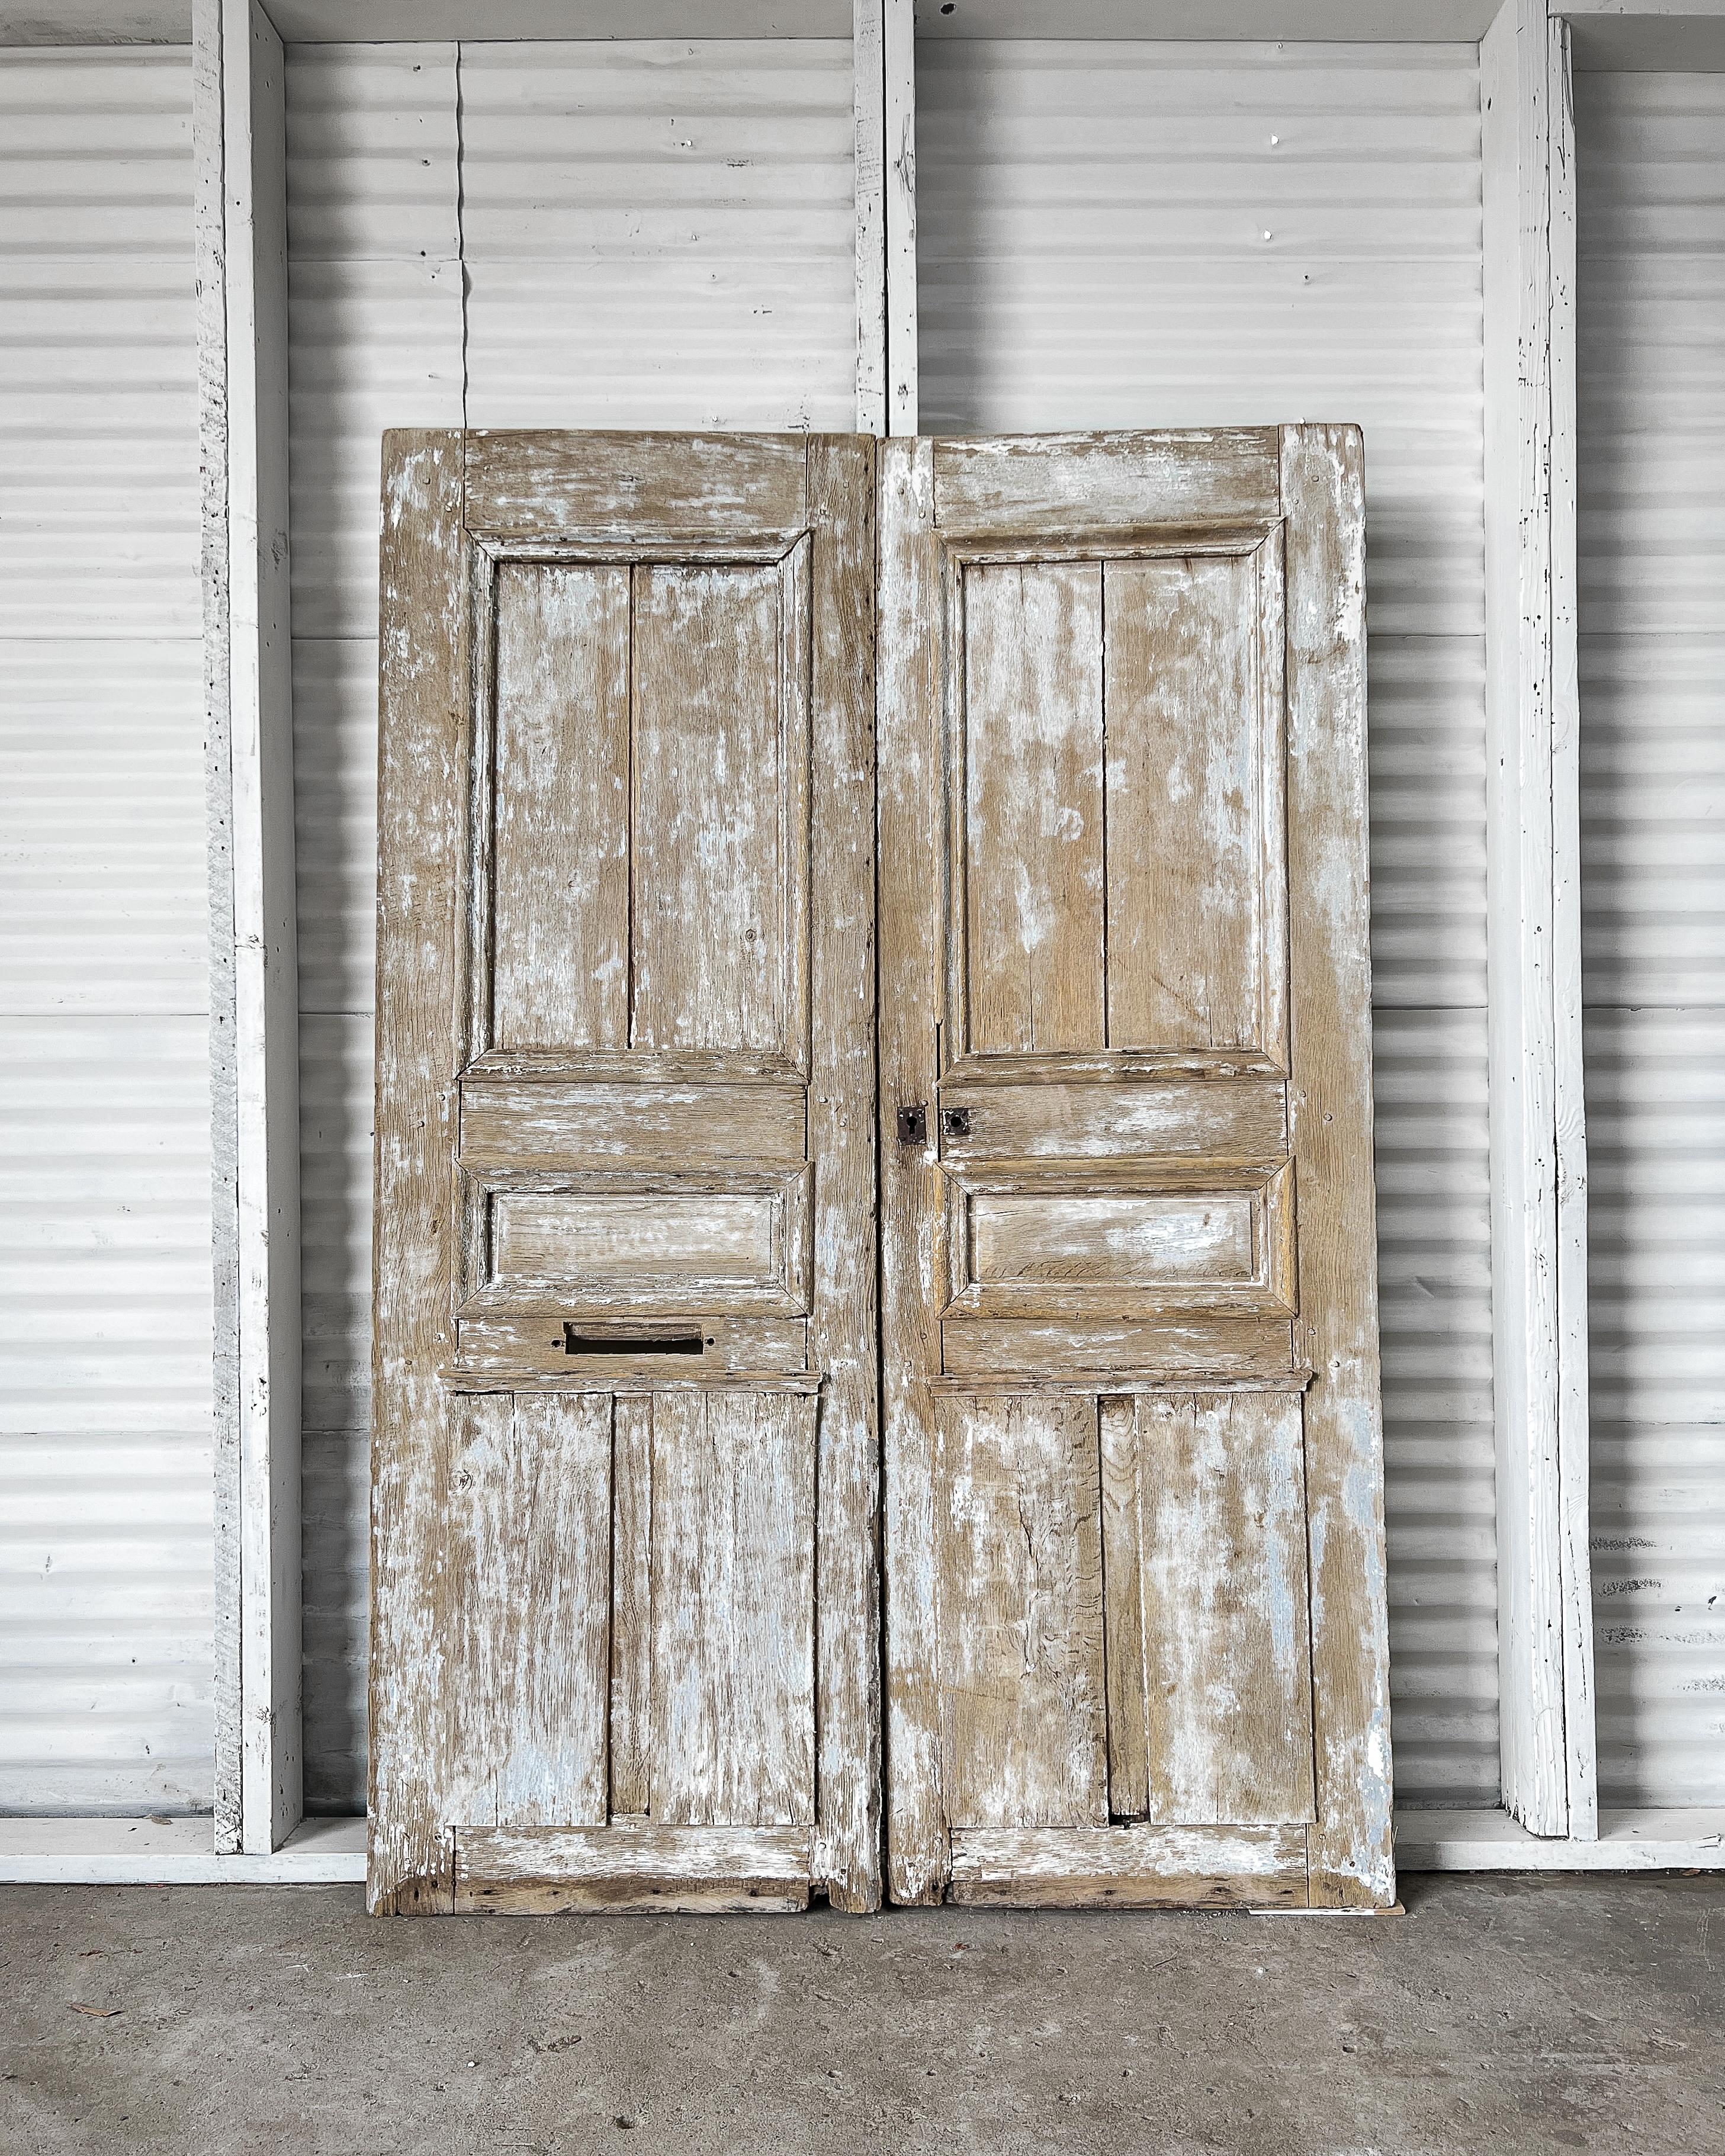 Reclaimed solid oak raised panel exterior doors with a rustic, weathered appearance. Once gracing a beautiful French home, these doors will add character and old-world charm to your modern home whether installed on the exterior of your home or used